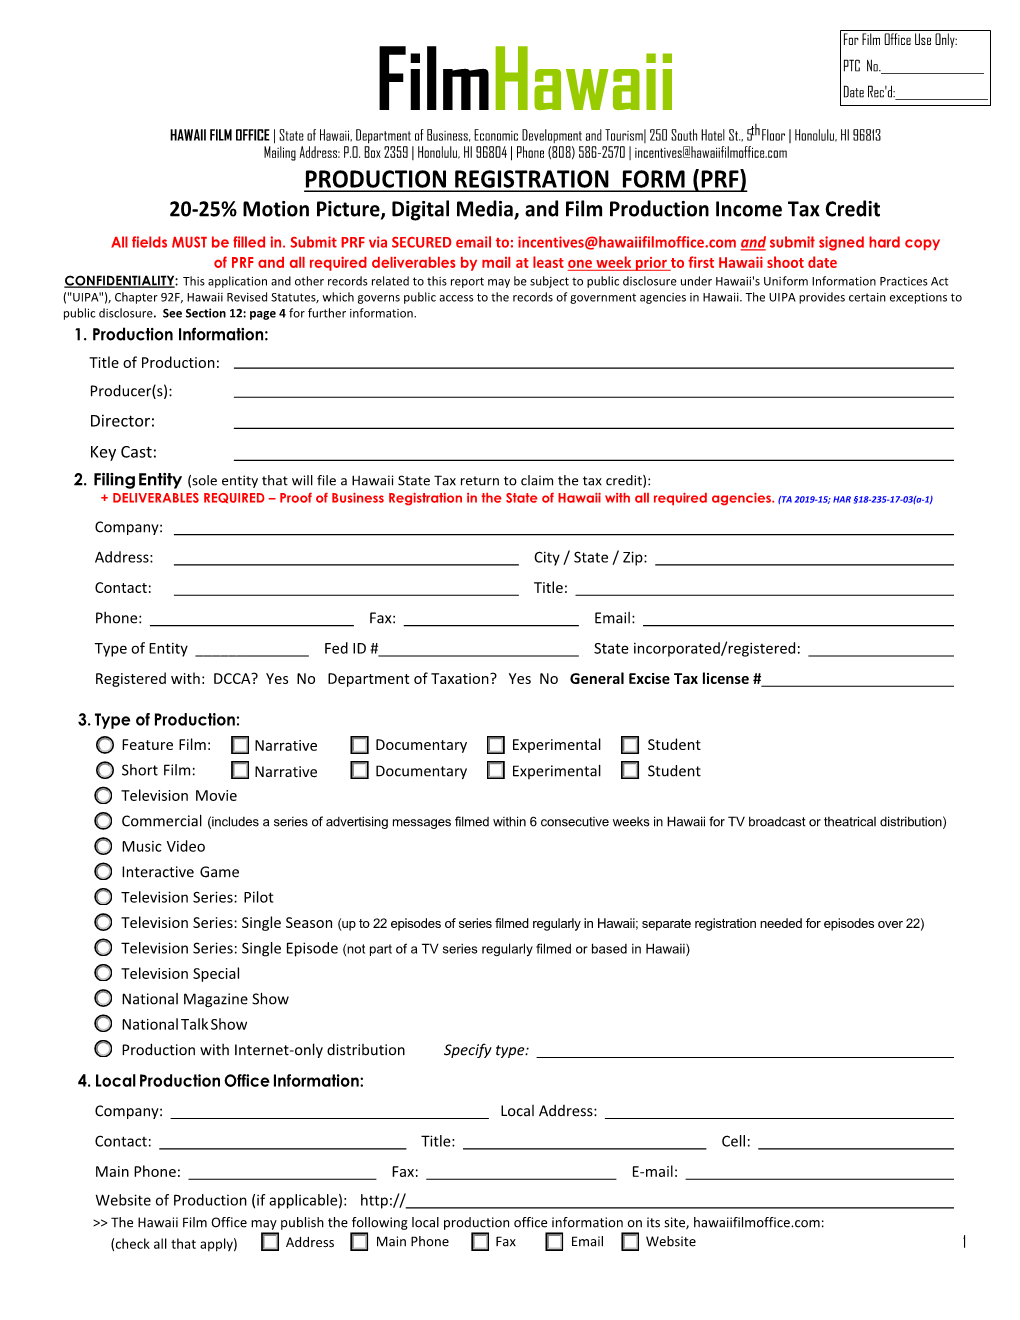 PRODUCTION REGISTRATION FORM (PRF) 20-25% Motion Picture, Digital Media, and Film Production Income Tax Credit All Fields MUST Be Filled In